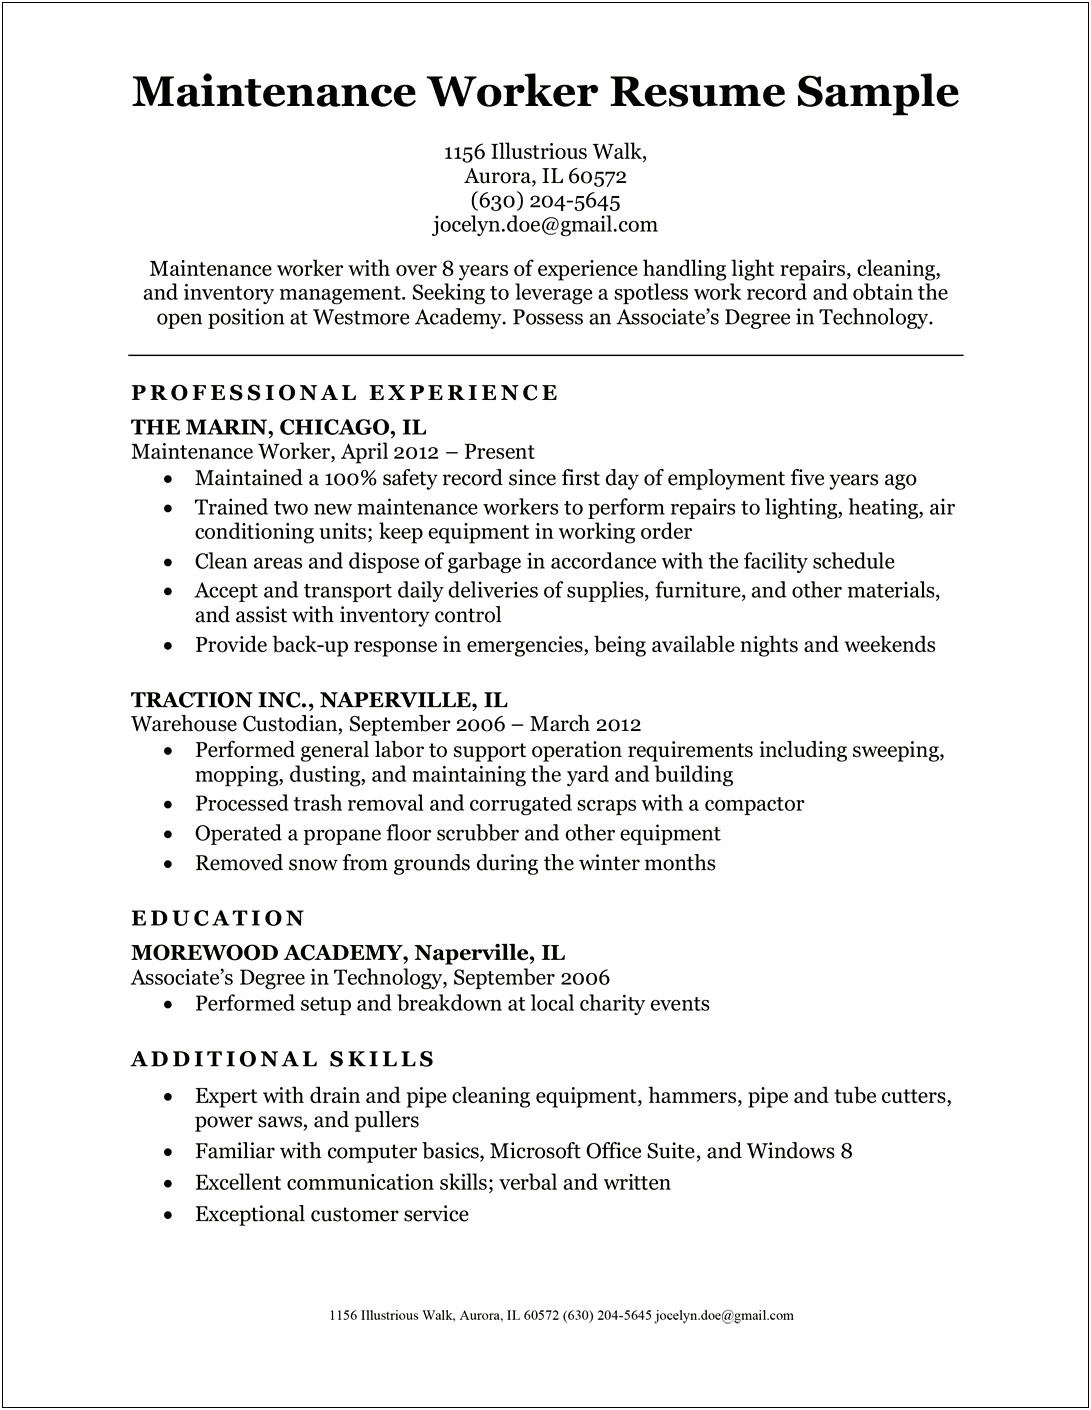 Basic Resume Examples For The Post Office